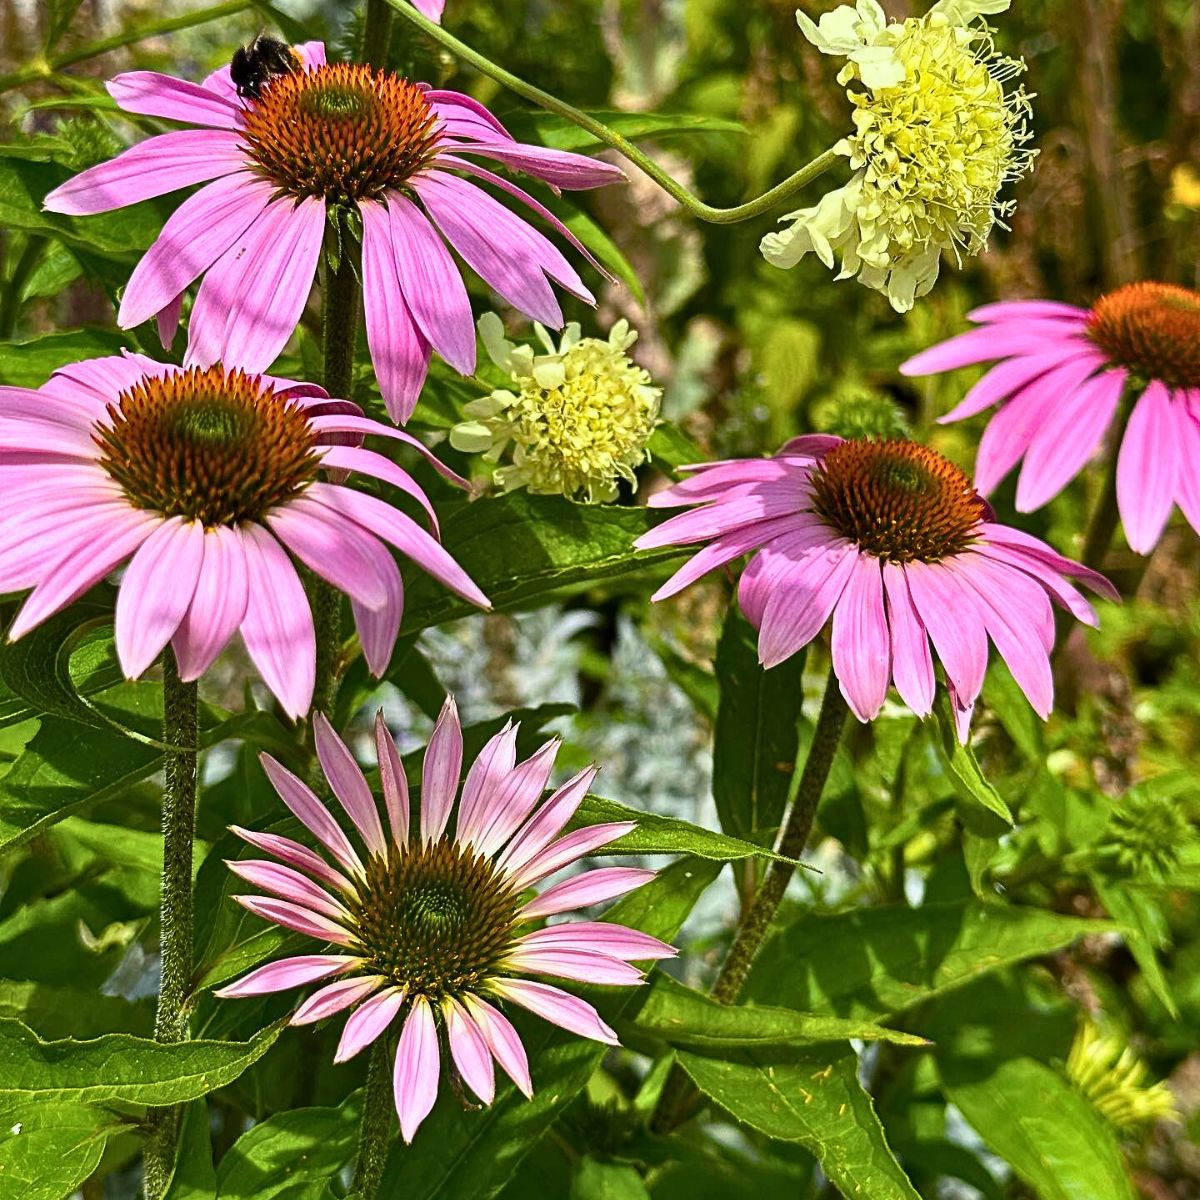 Classic Summer Flowers for Planting and Potting